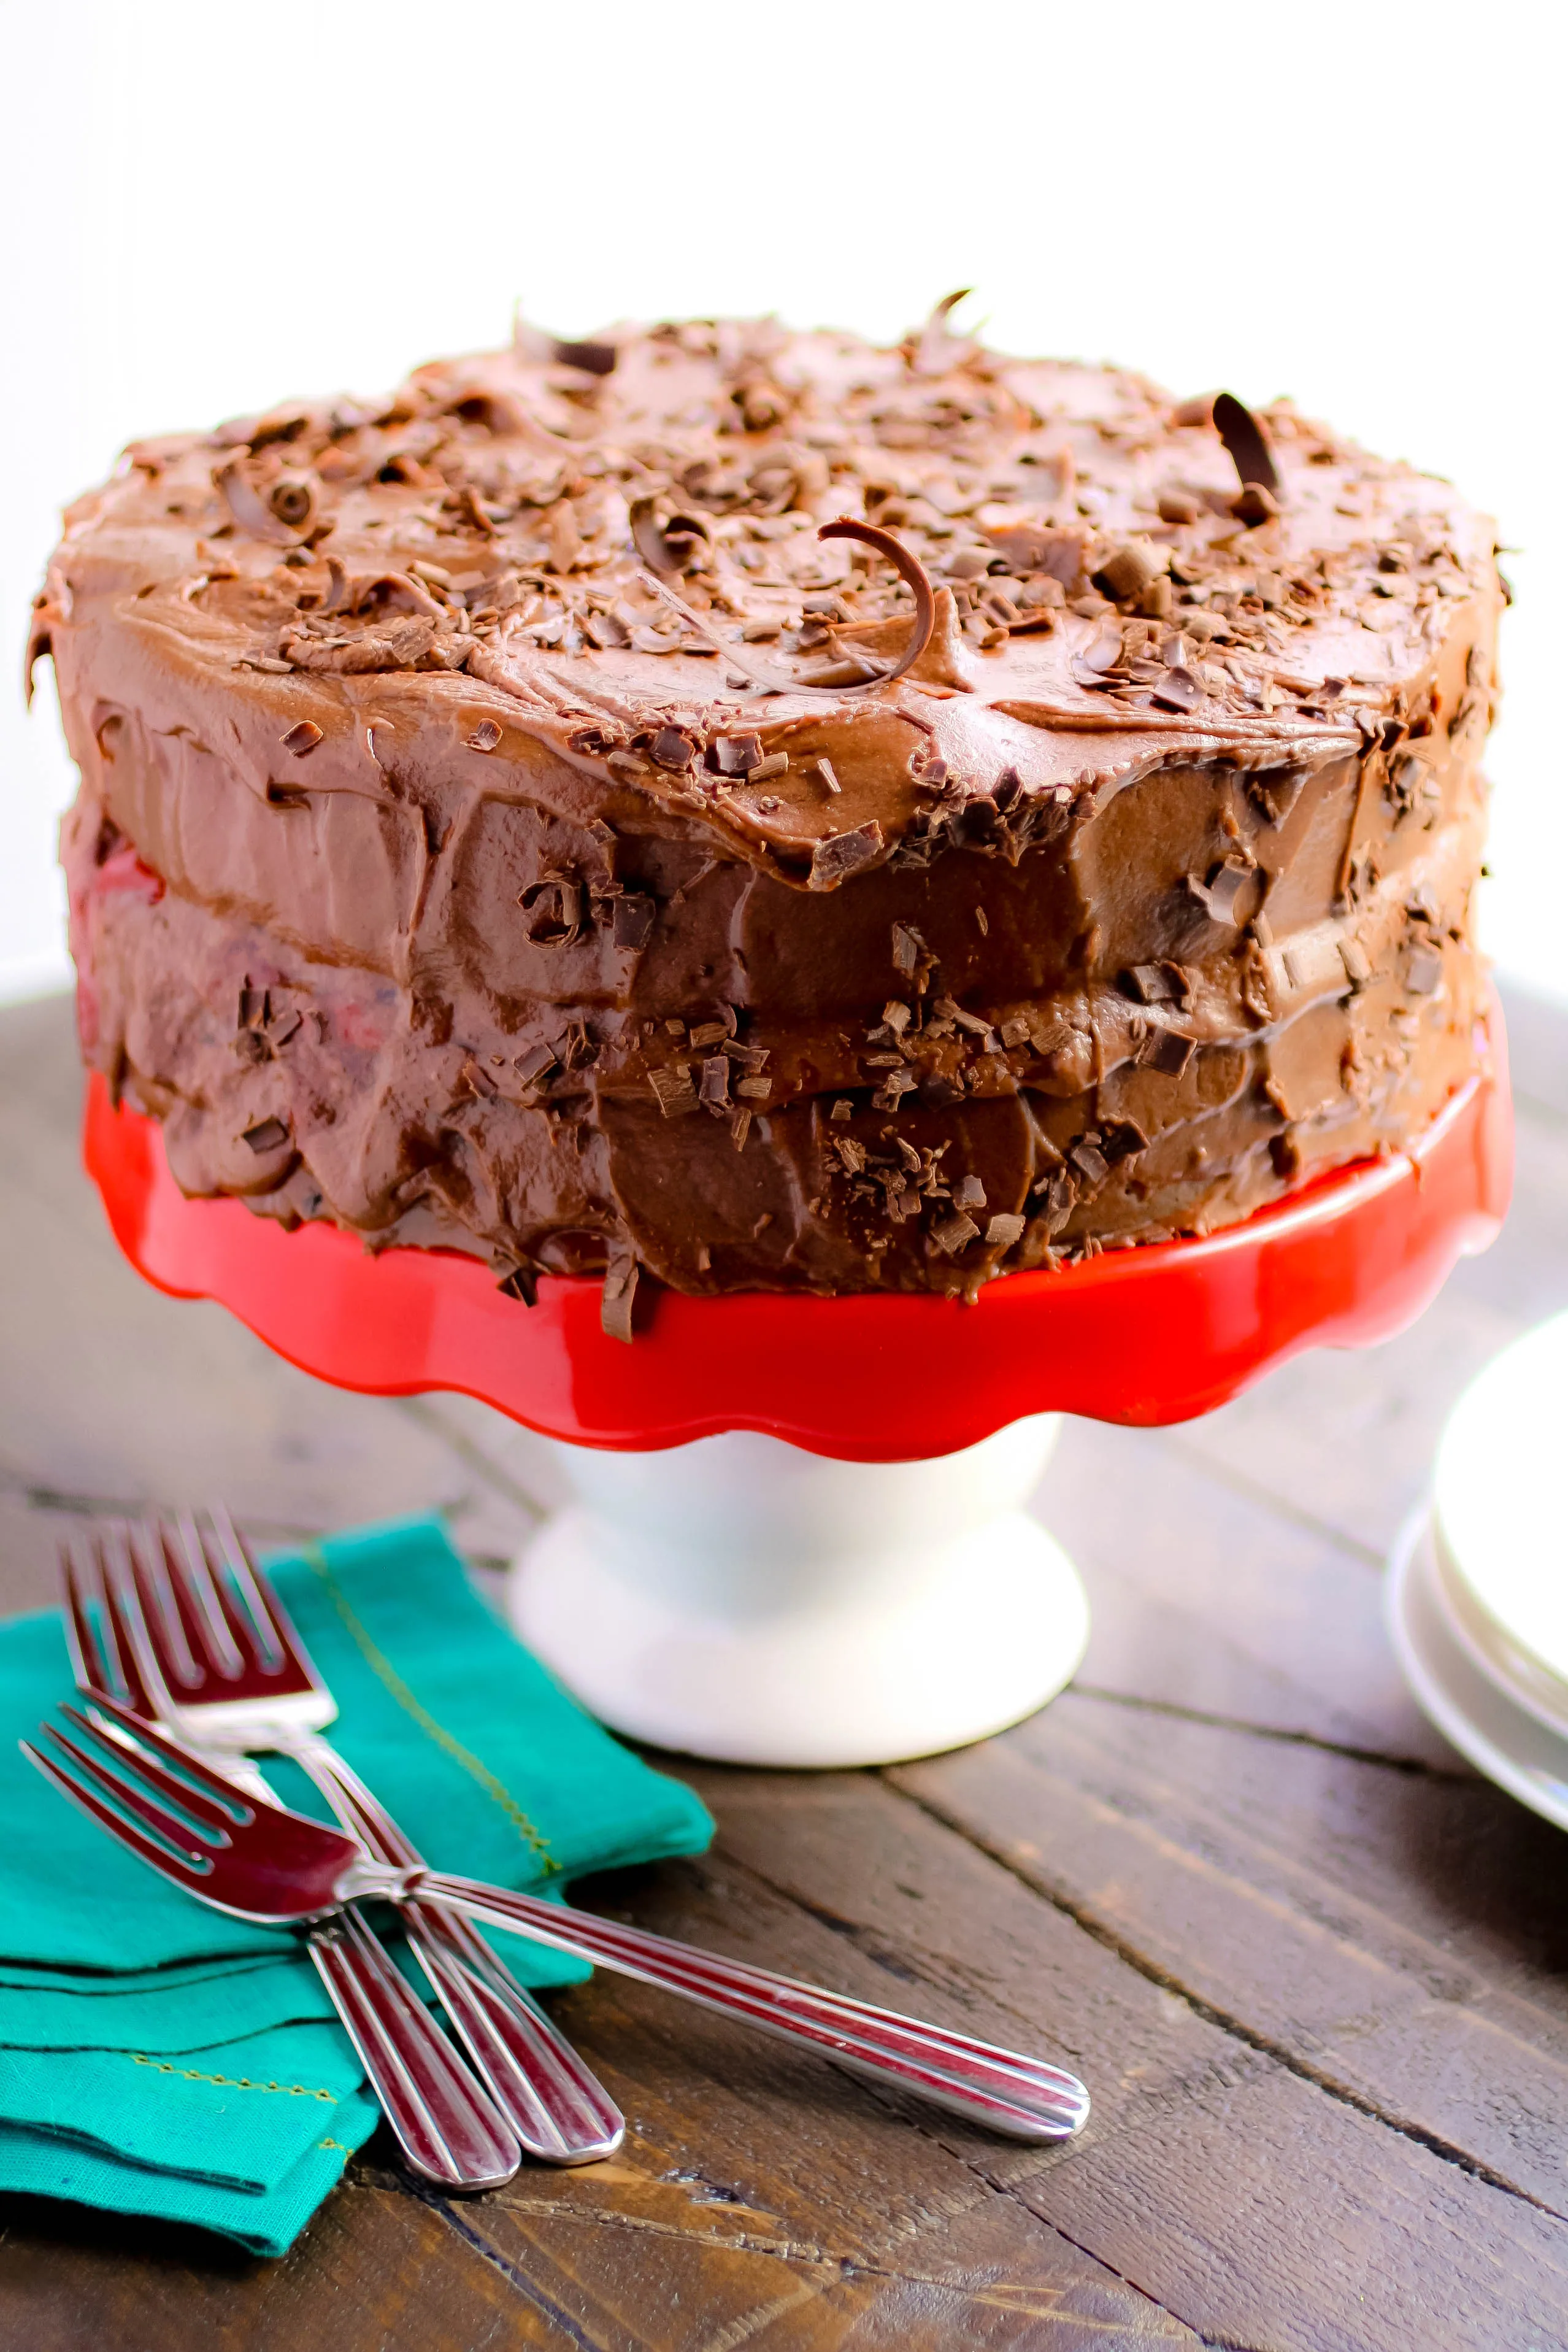 Chocolate Salad Dressing Cake with Cherries and Chocolate Buttercream Frosting is a decadent treat. Make Chocolate Salad Dressing Cake with Cherries and Chocolate Buttercream Frosting for a special occasion.